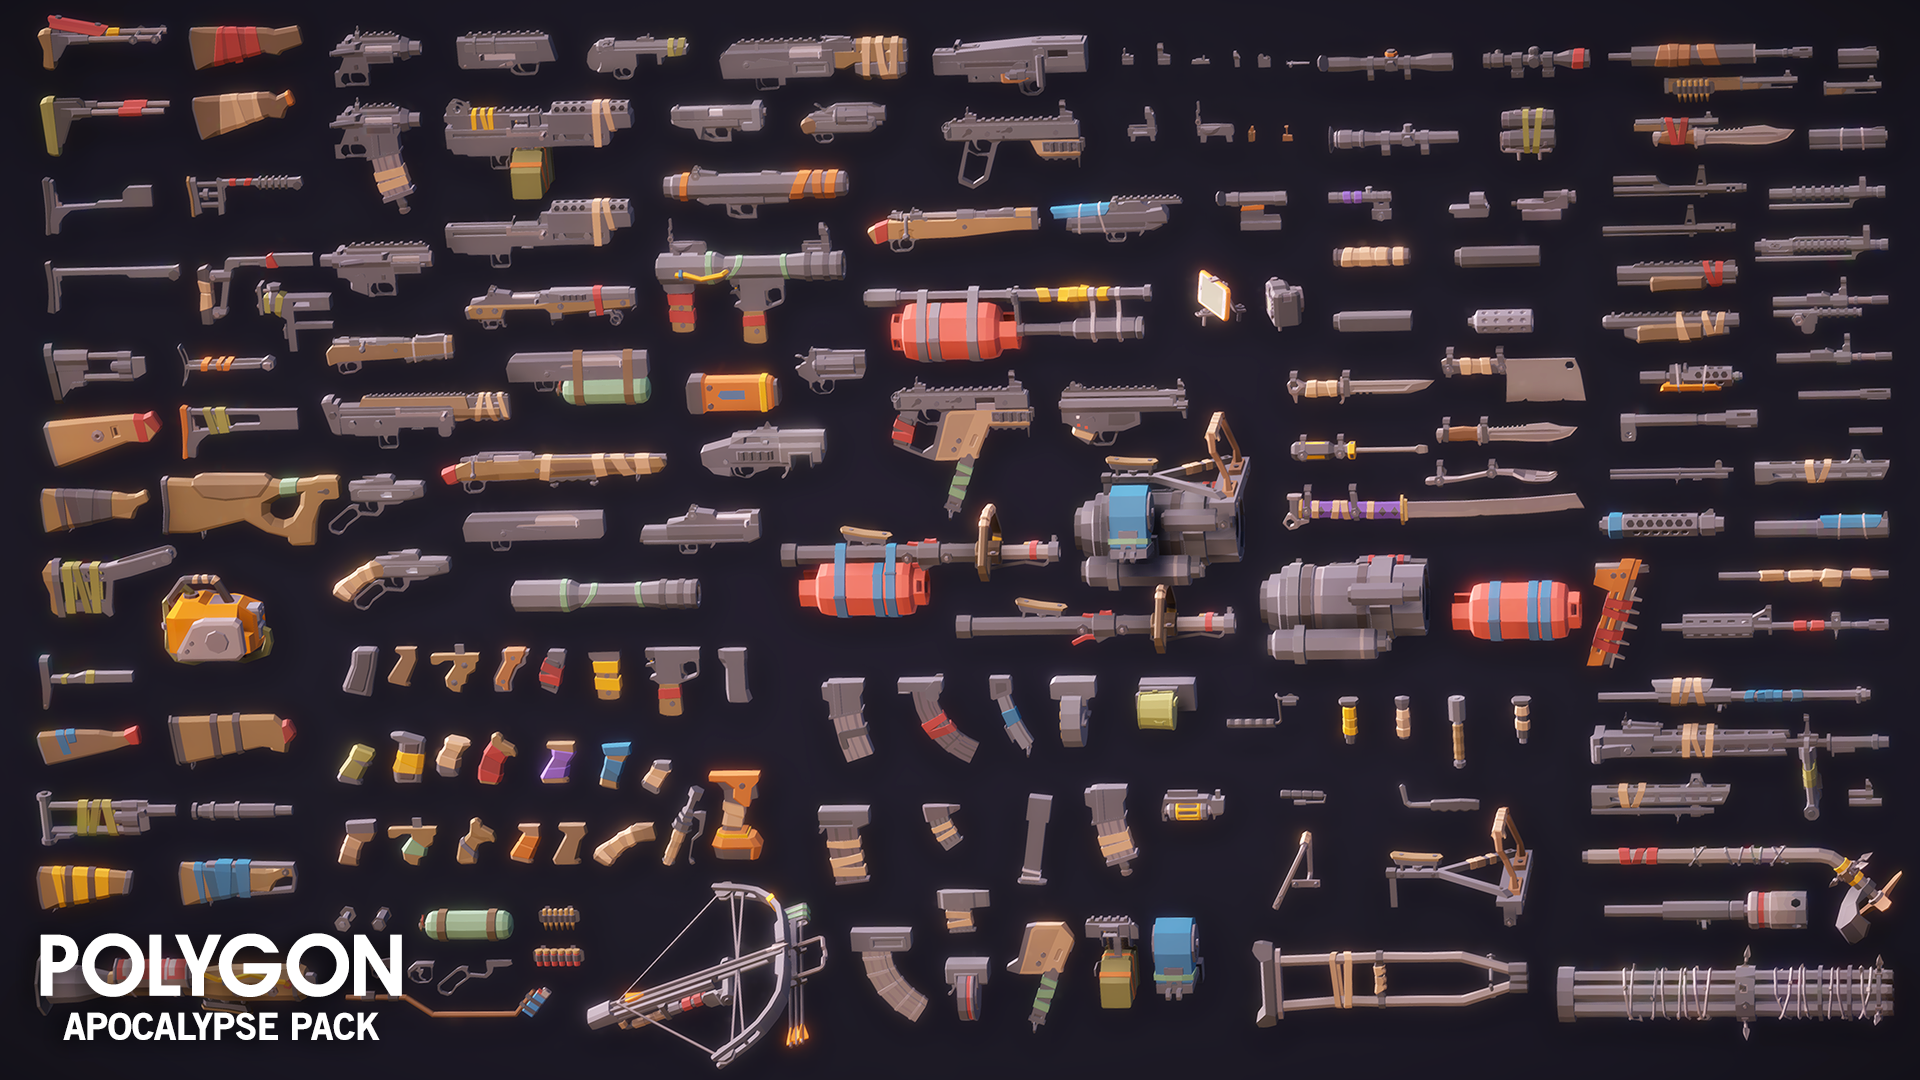 Apocalypse Pack 3D low poly wasteland ammo and prop assets for game development